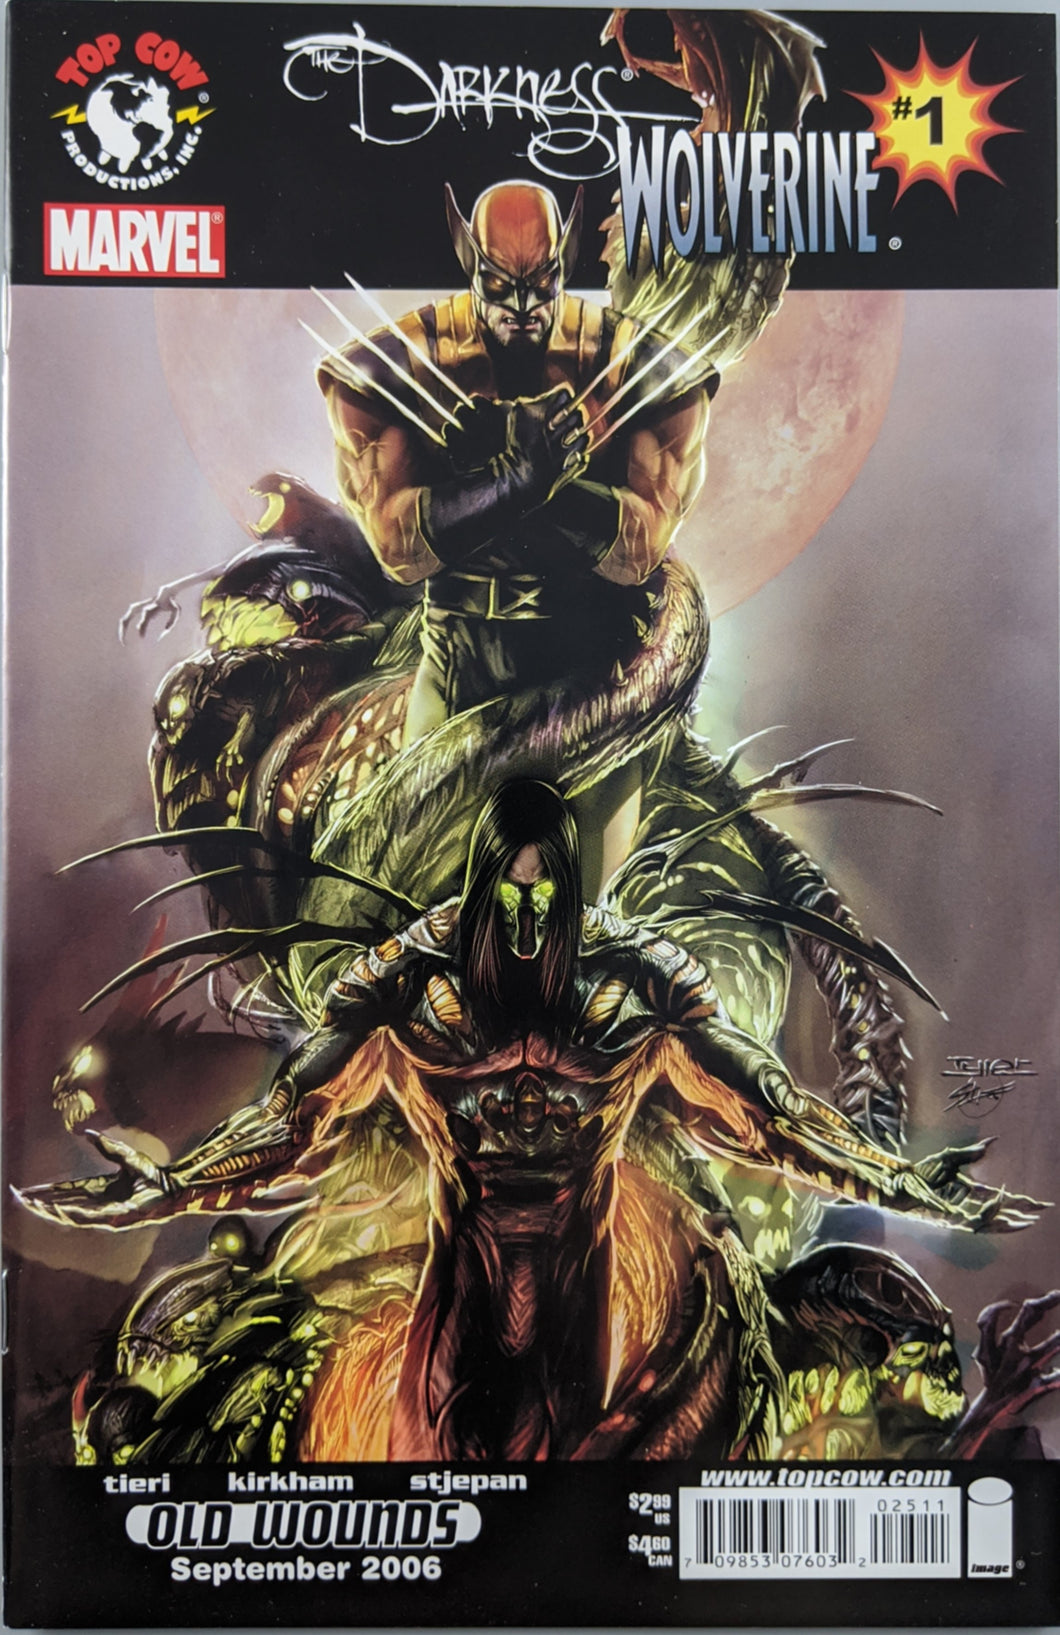 Darkness Wolverine #1 Comic Book Cover Art